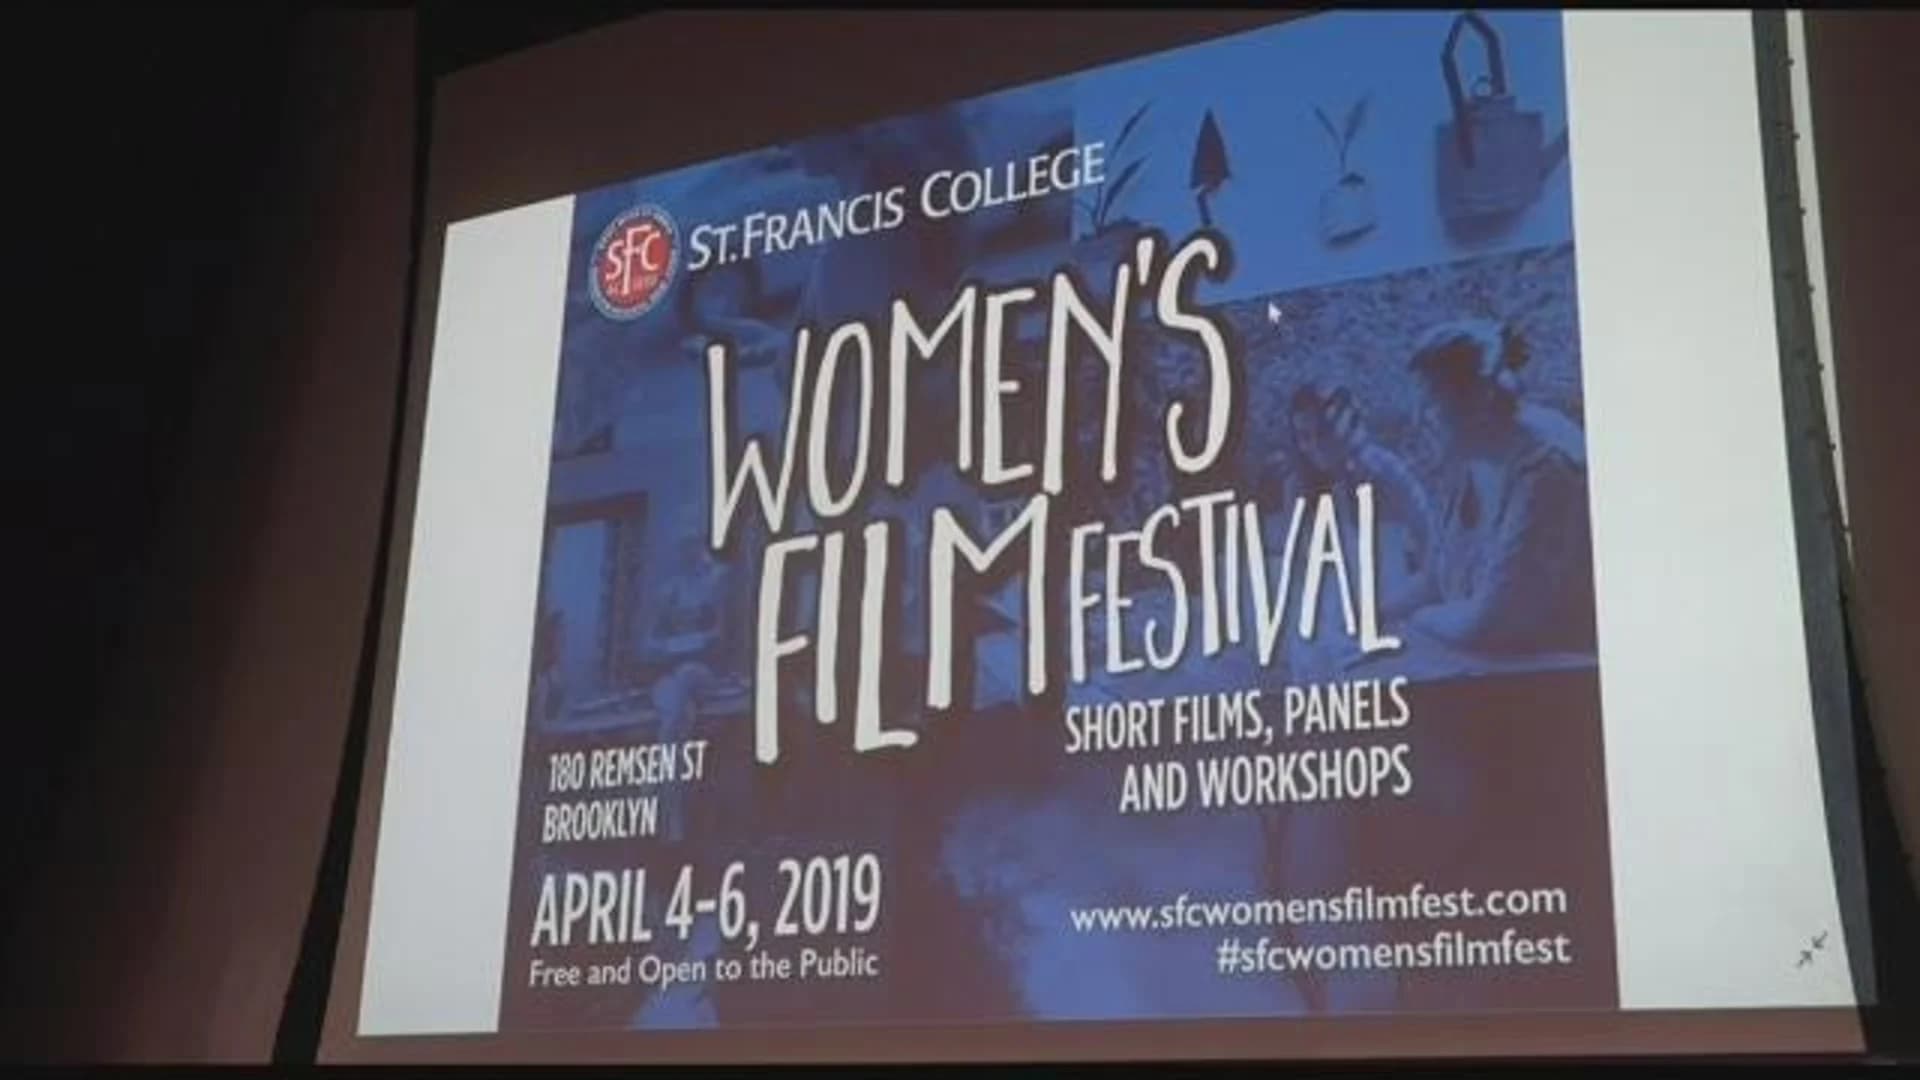 Women’s Film Festival wraps up at St. Francis College